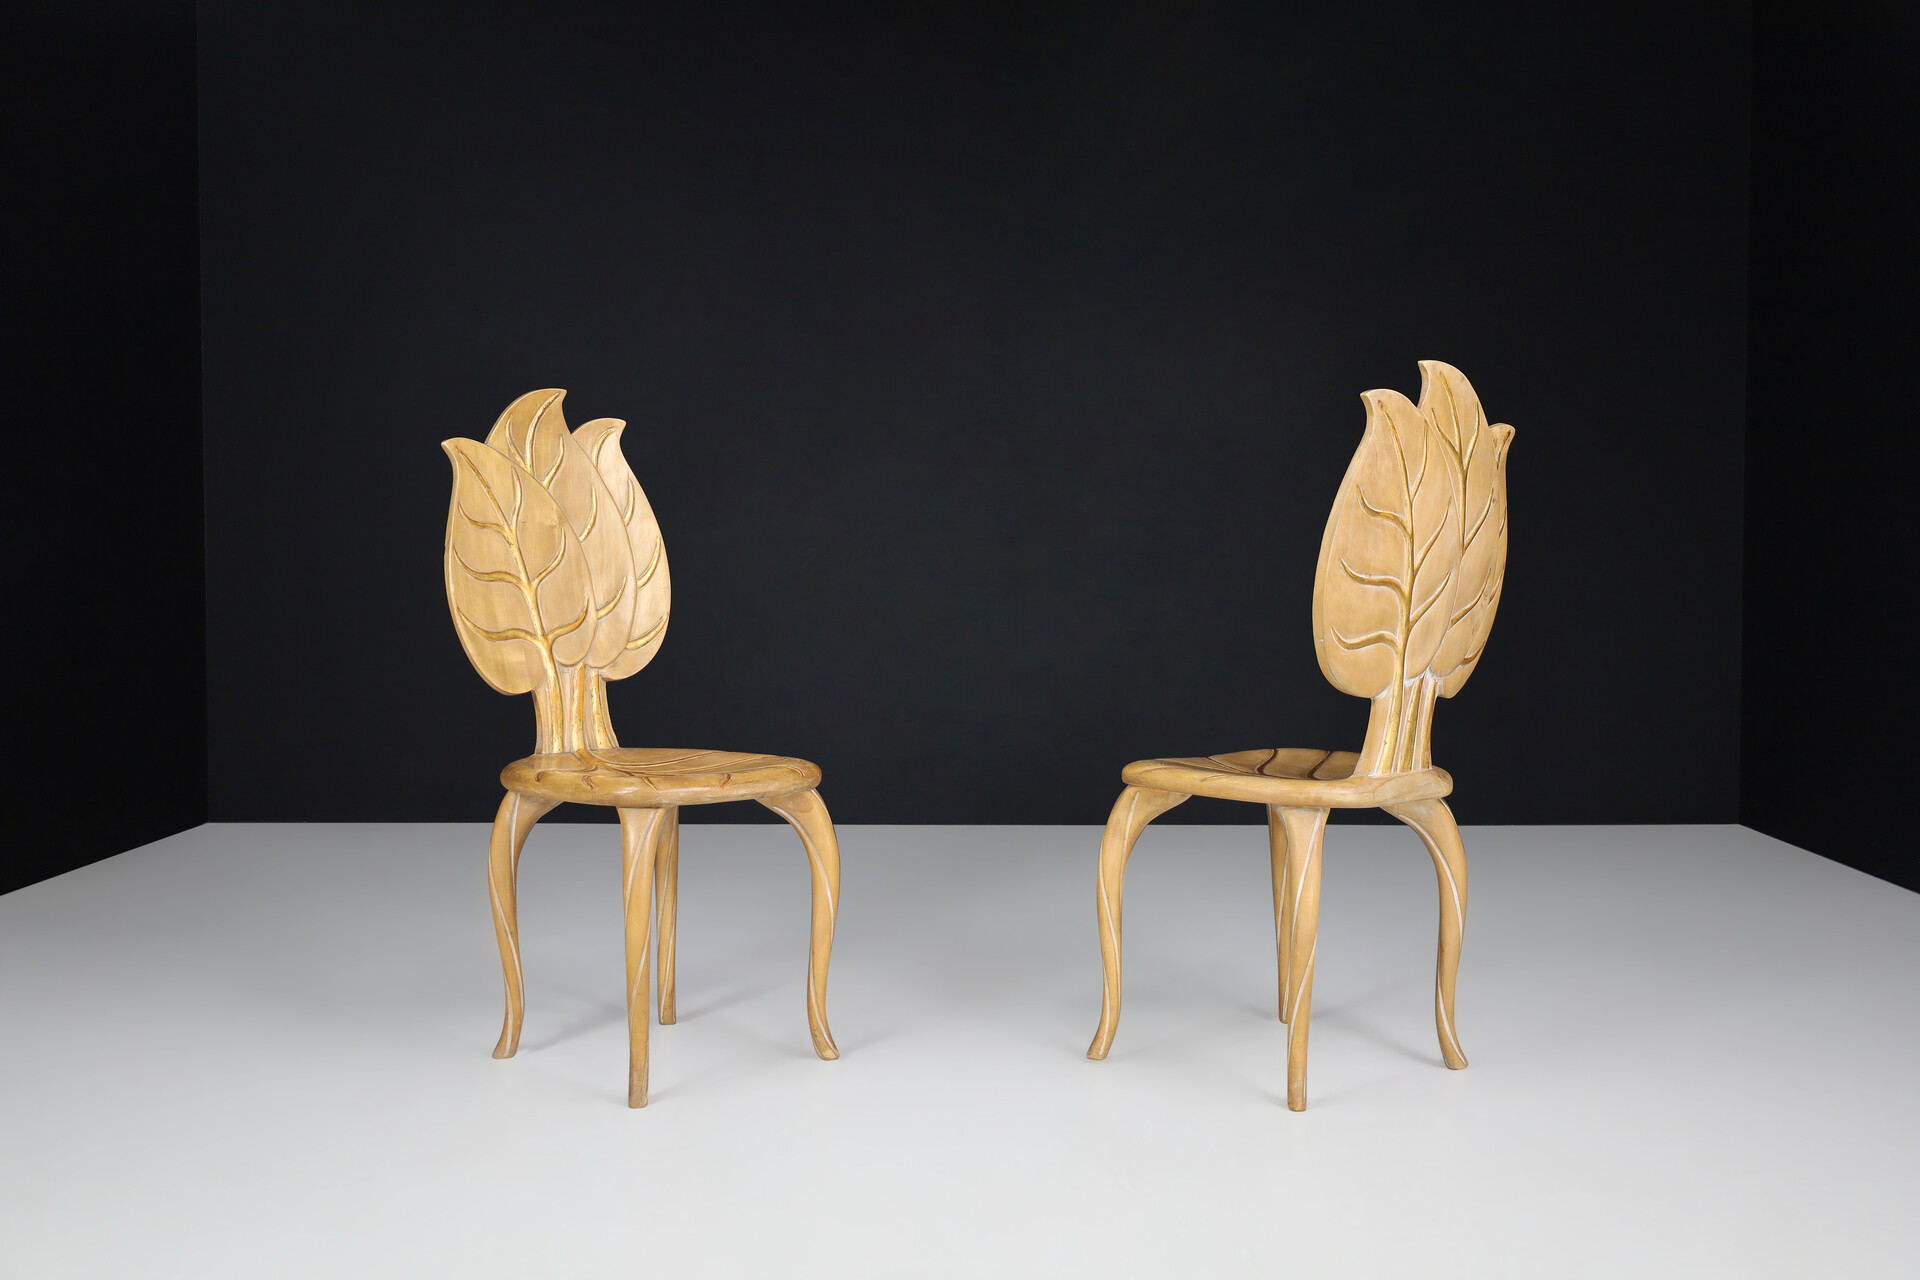 Art and craft Bartolozzi & Maioli Wooden and Gold Leaf Chairs, Italy, 1970s Late-20th century